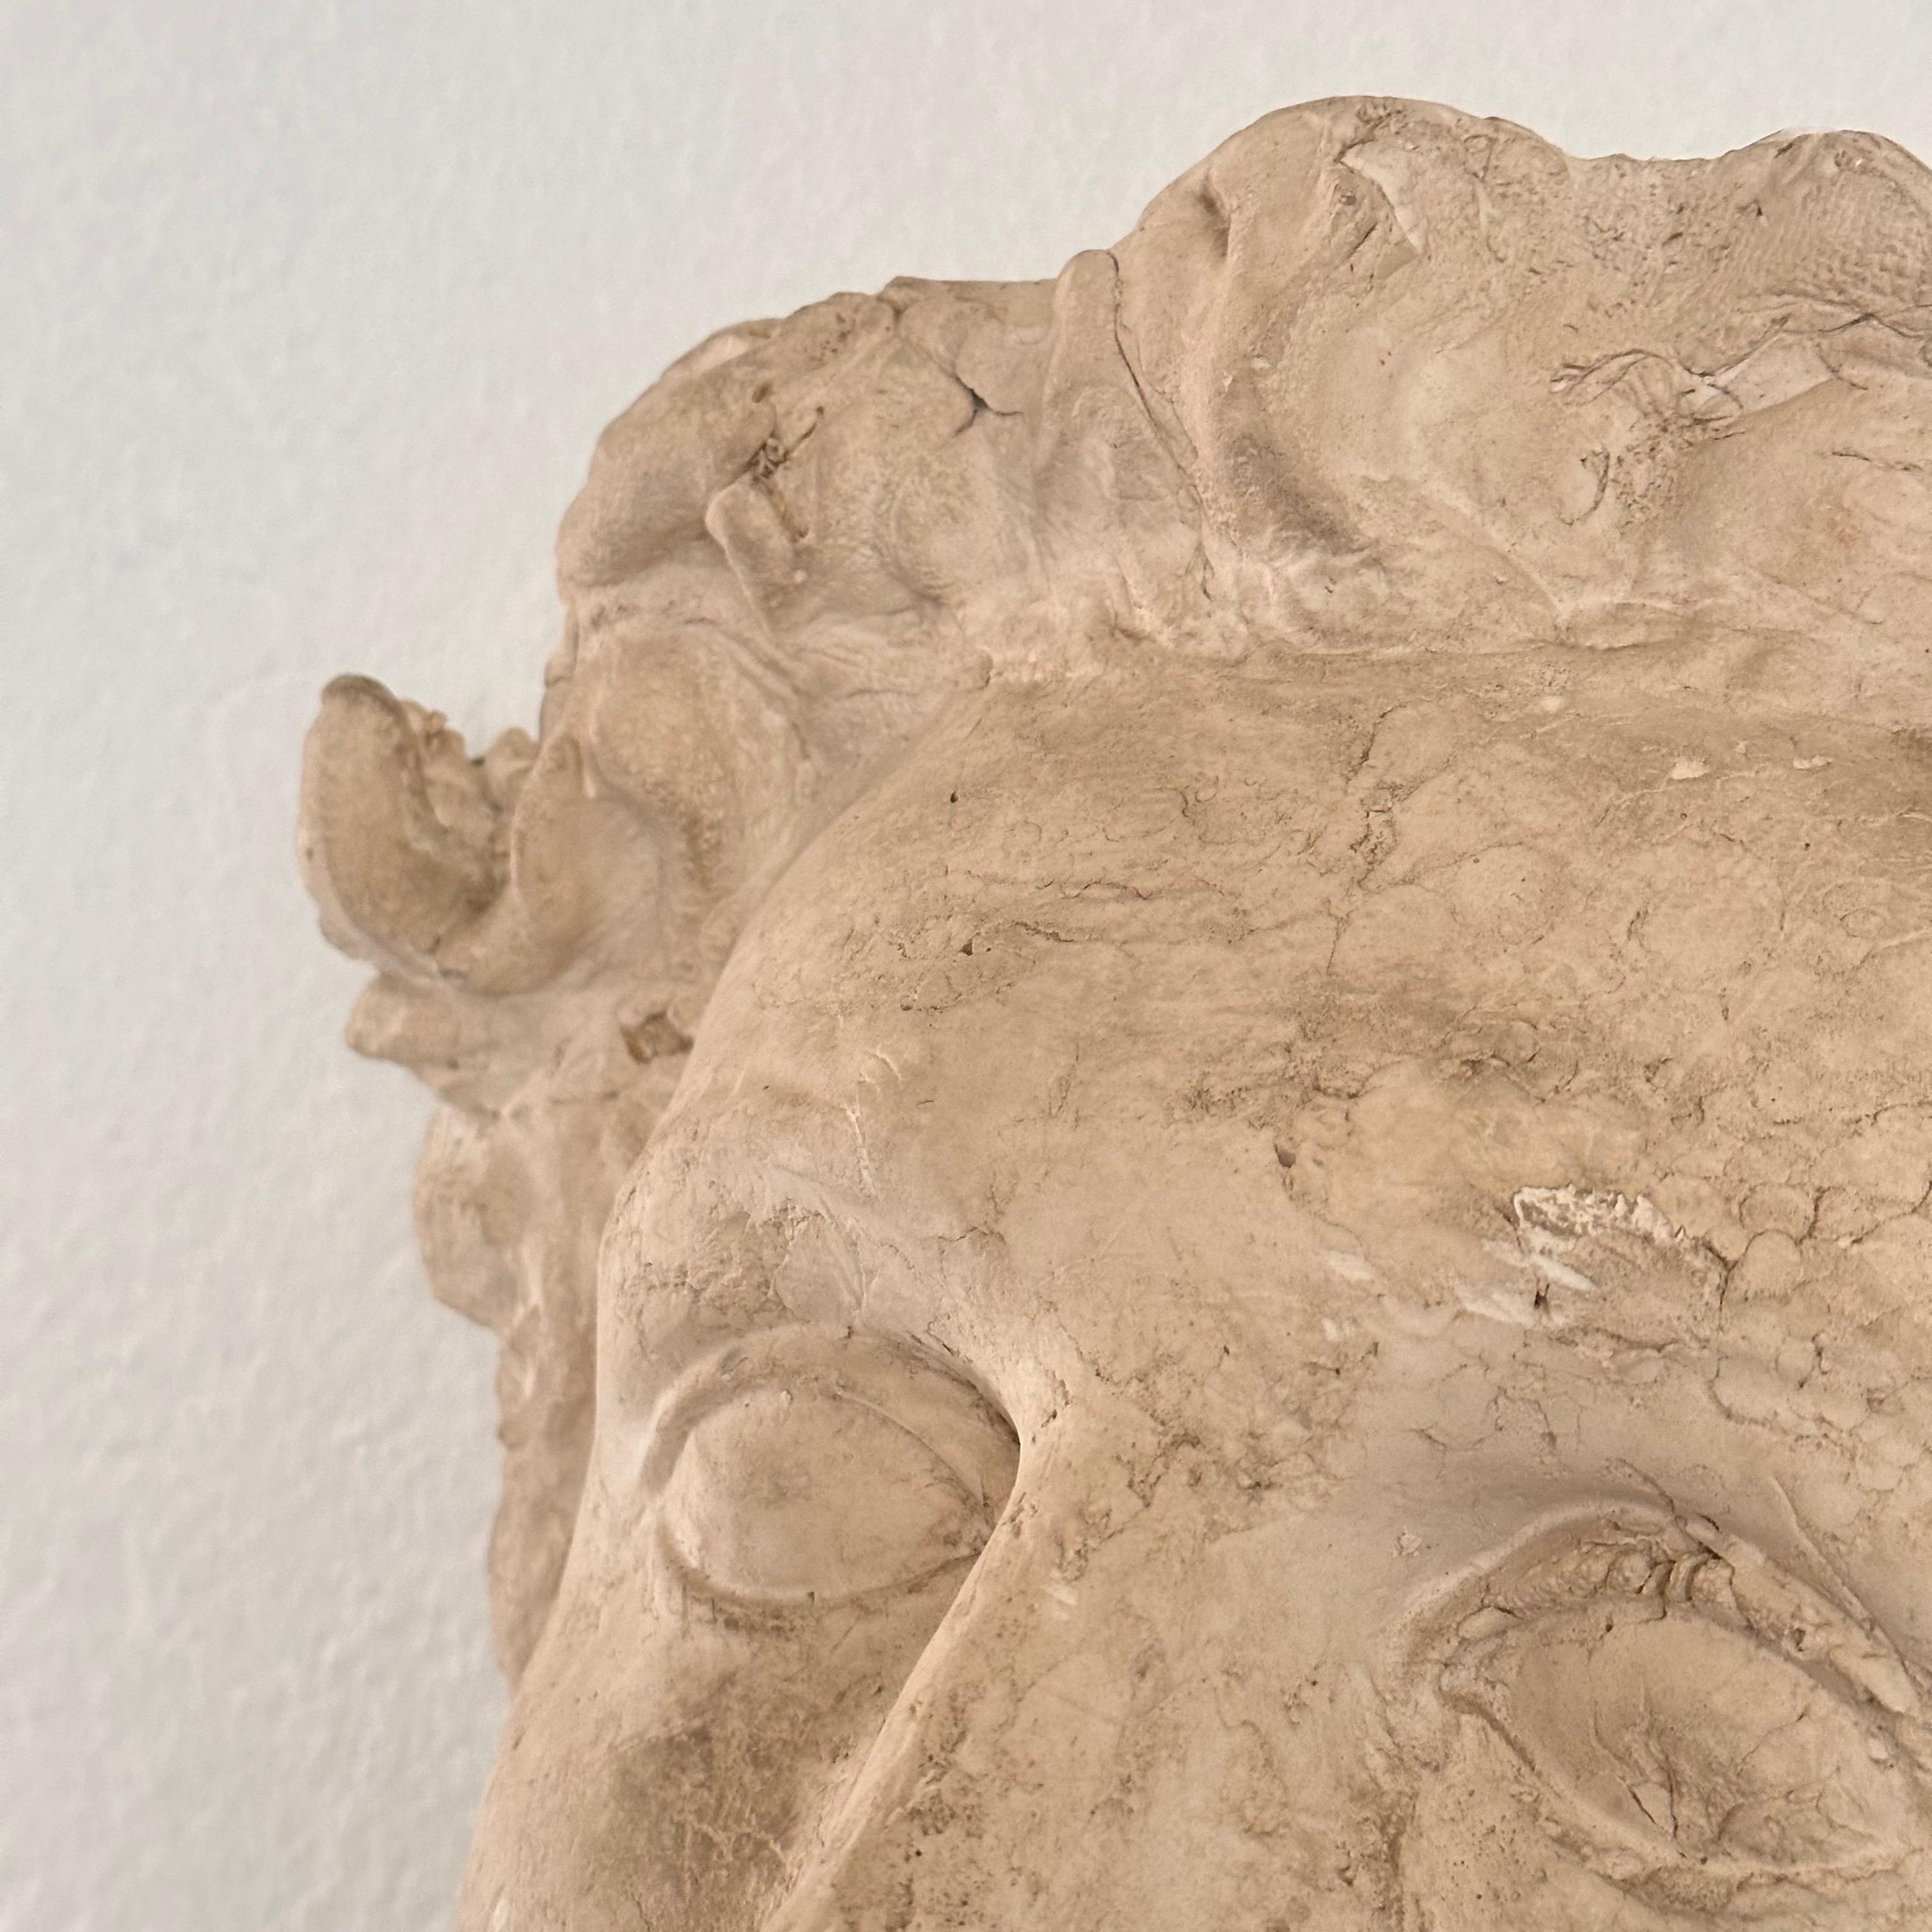 Stunning Decorative Roman Gypsum Face, 1970s Reproduction For Sale 2